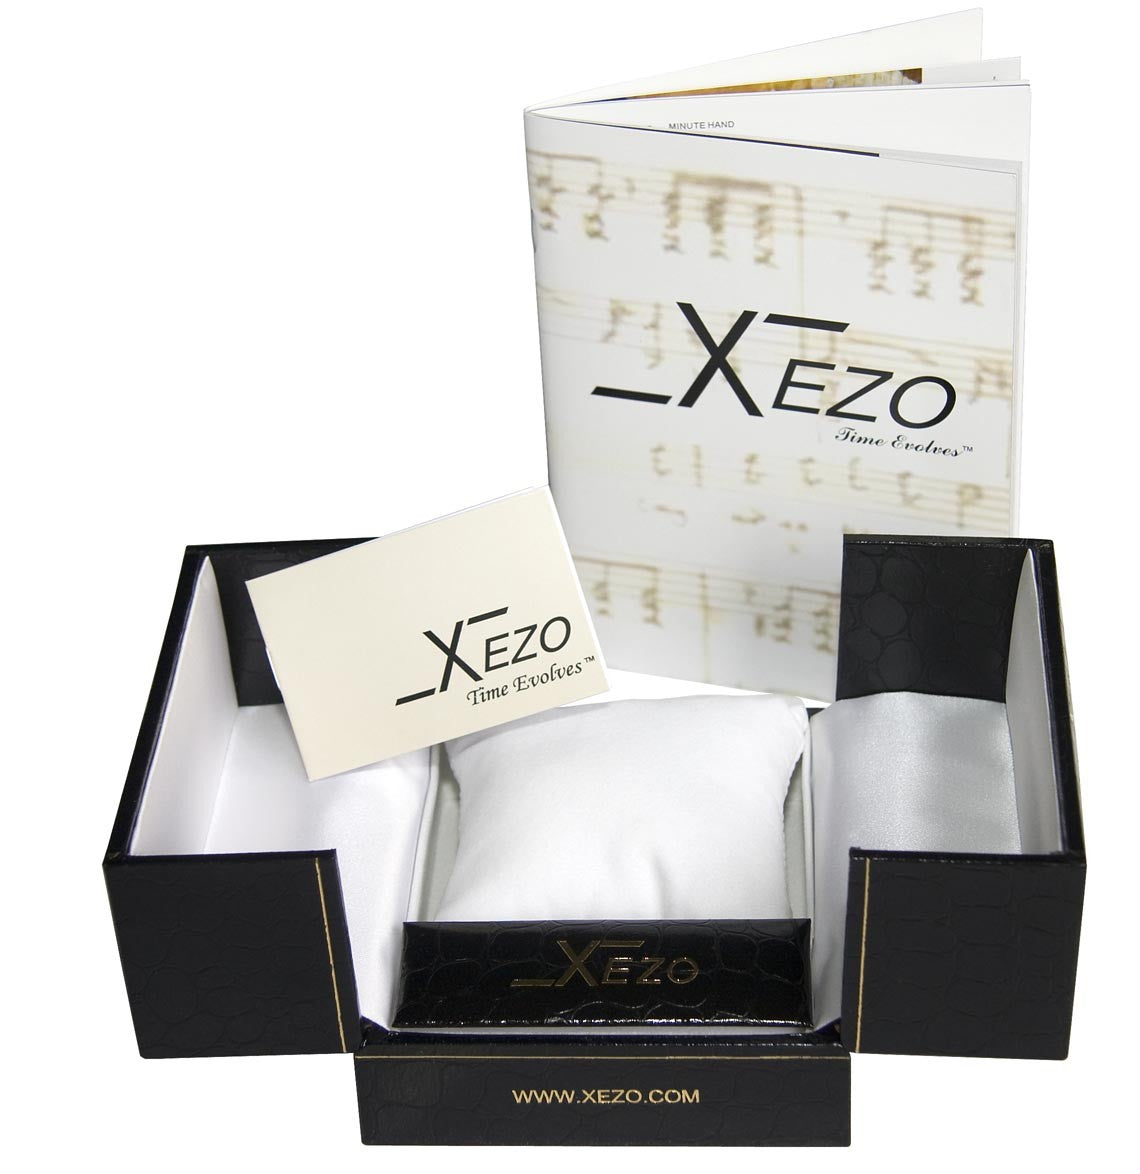 Xezo - Black gift box, certificate, and manual of the Architect 2001 BA S Tank watch